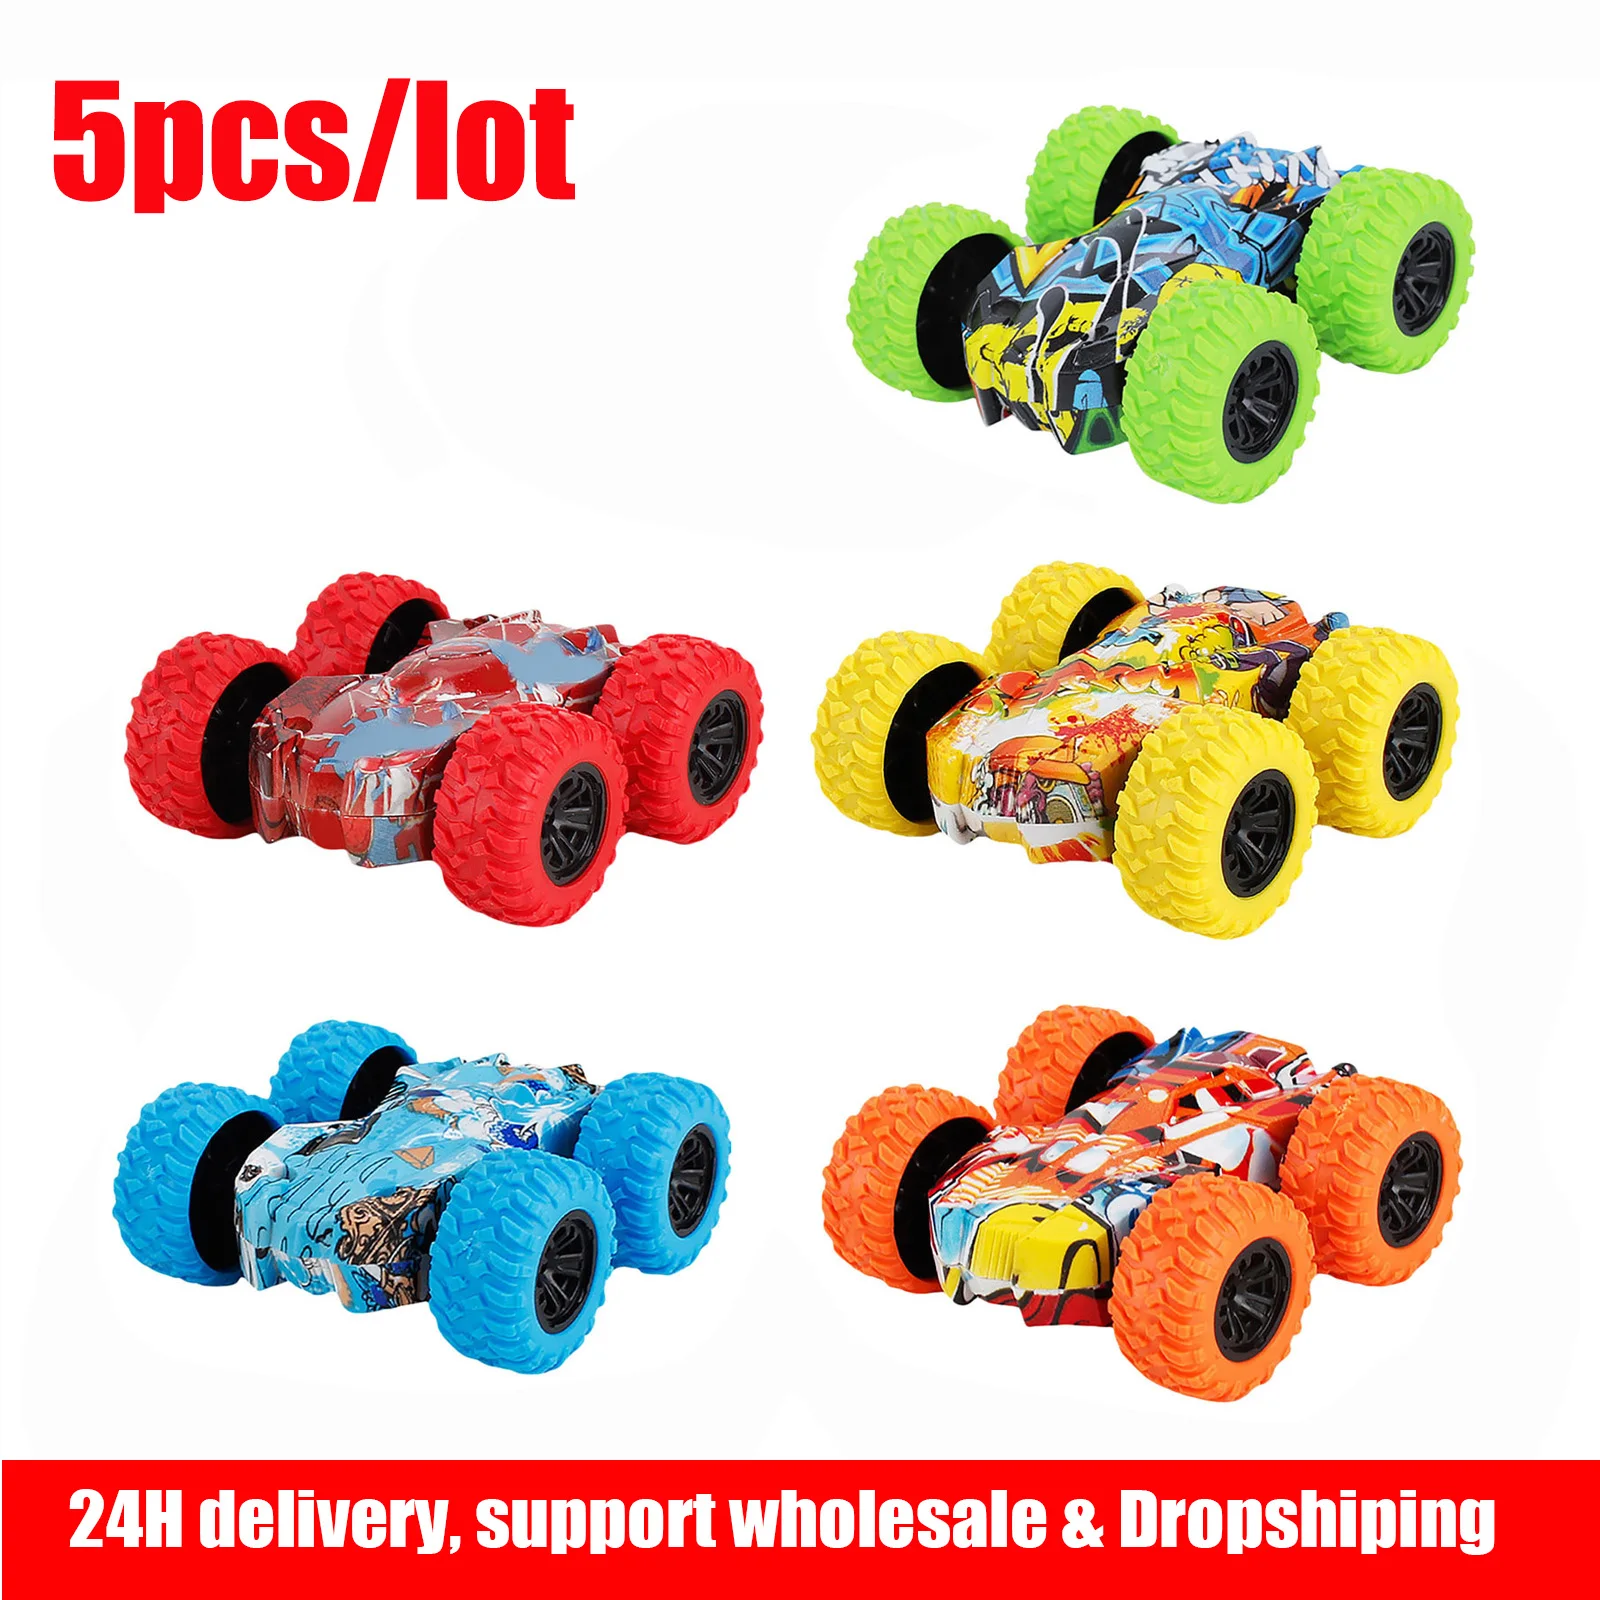 5pcs Double-sided Max 83% OFF Graffiti Stunt Car 4wd Off-road Friction C 5 ☆ very popular